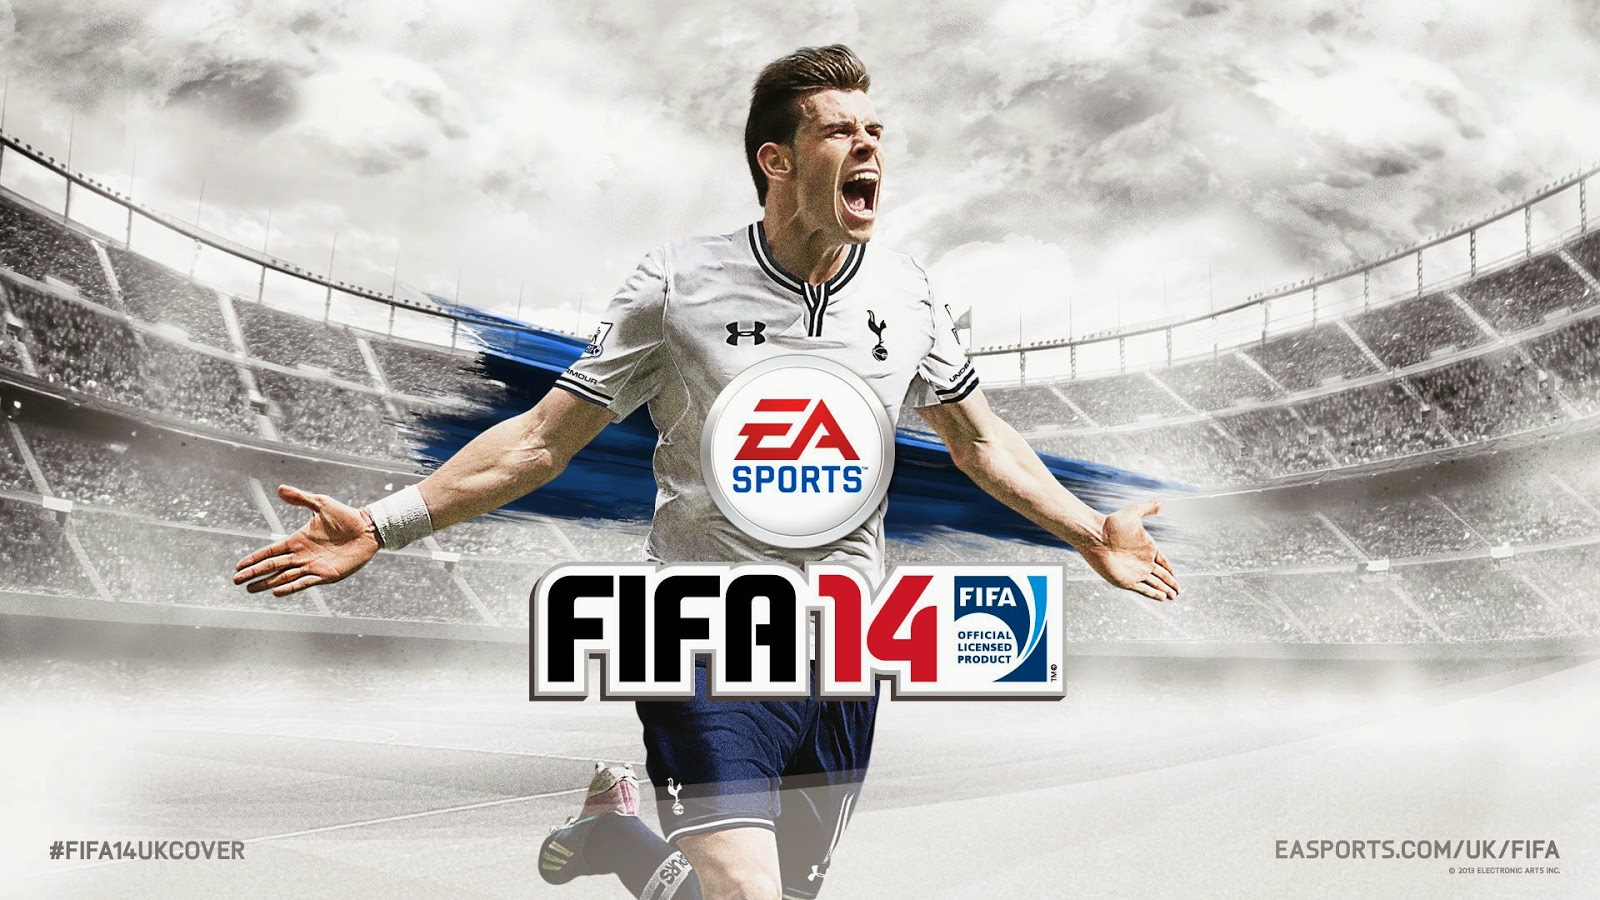 Fifa World Cup 2014 Free Download PC Game (Updated)